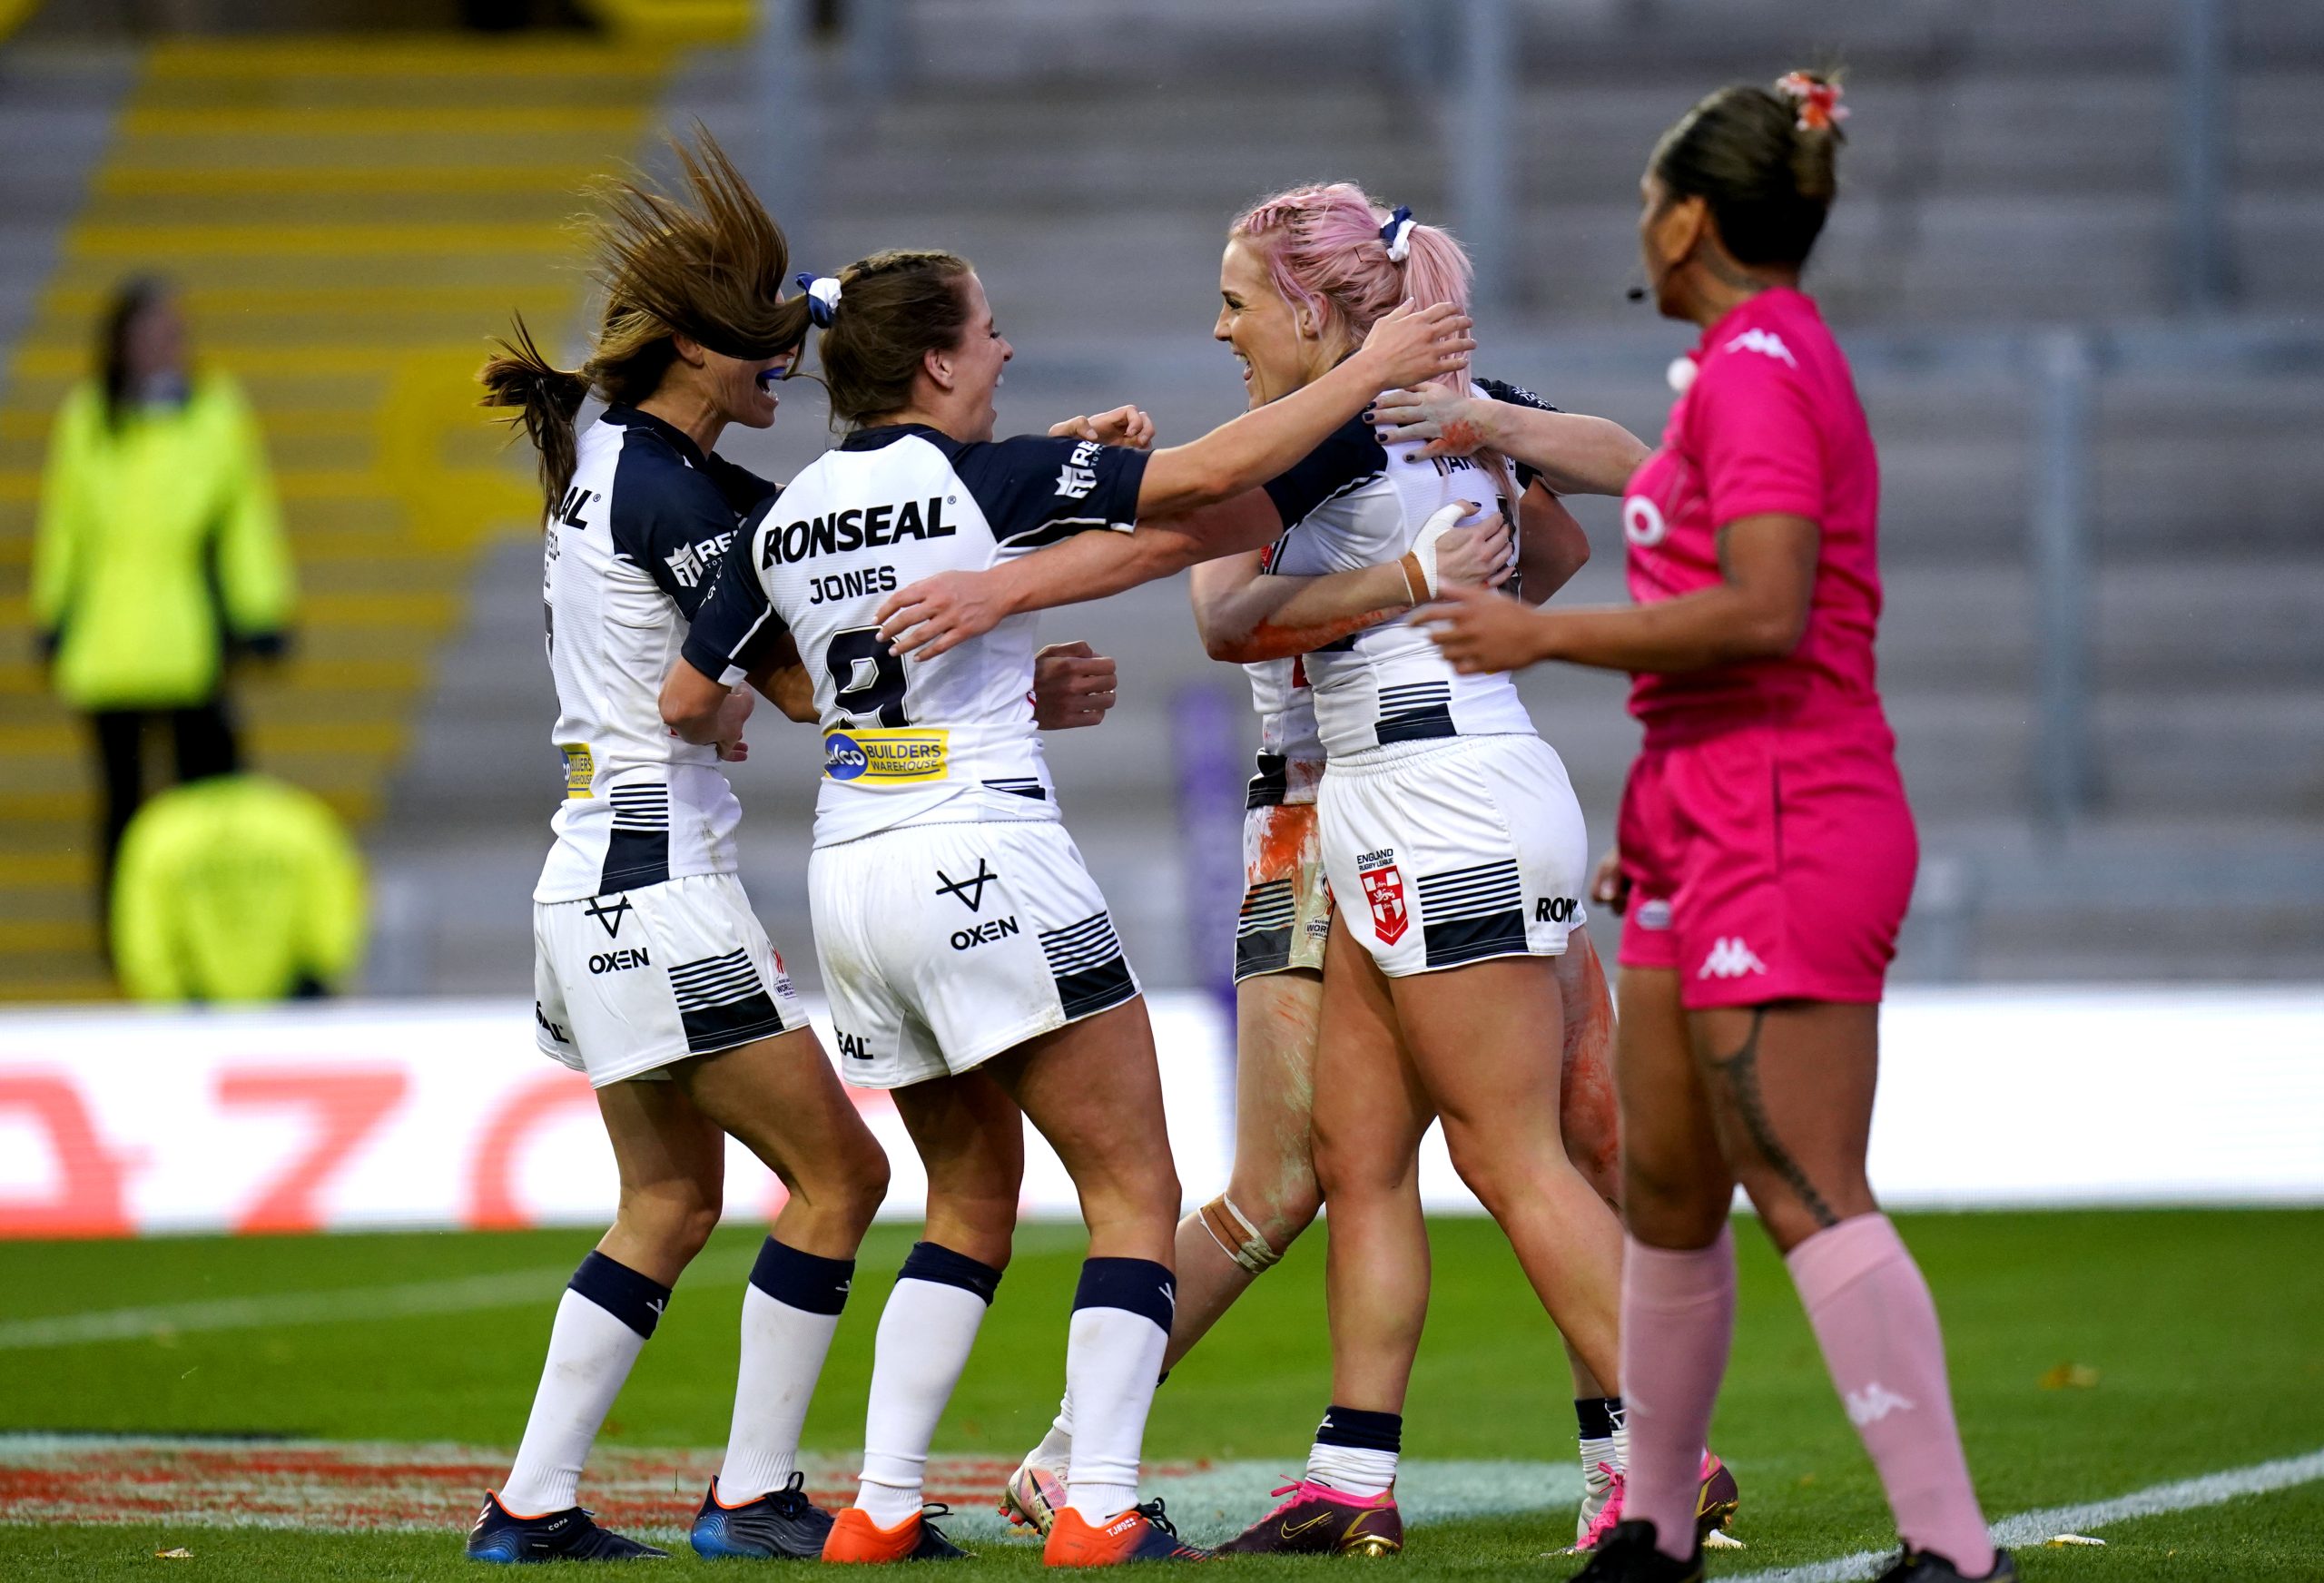 Amy Hardcastle hails Headingley crowd after England’s dominant win over Brazil